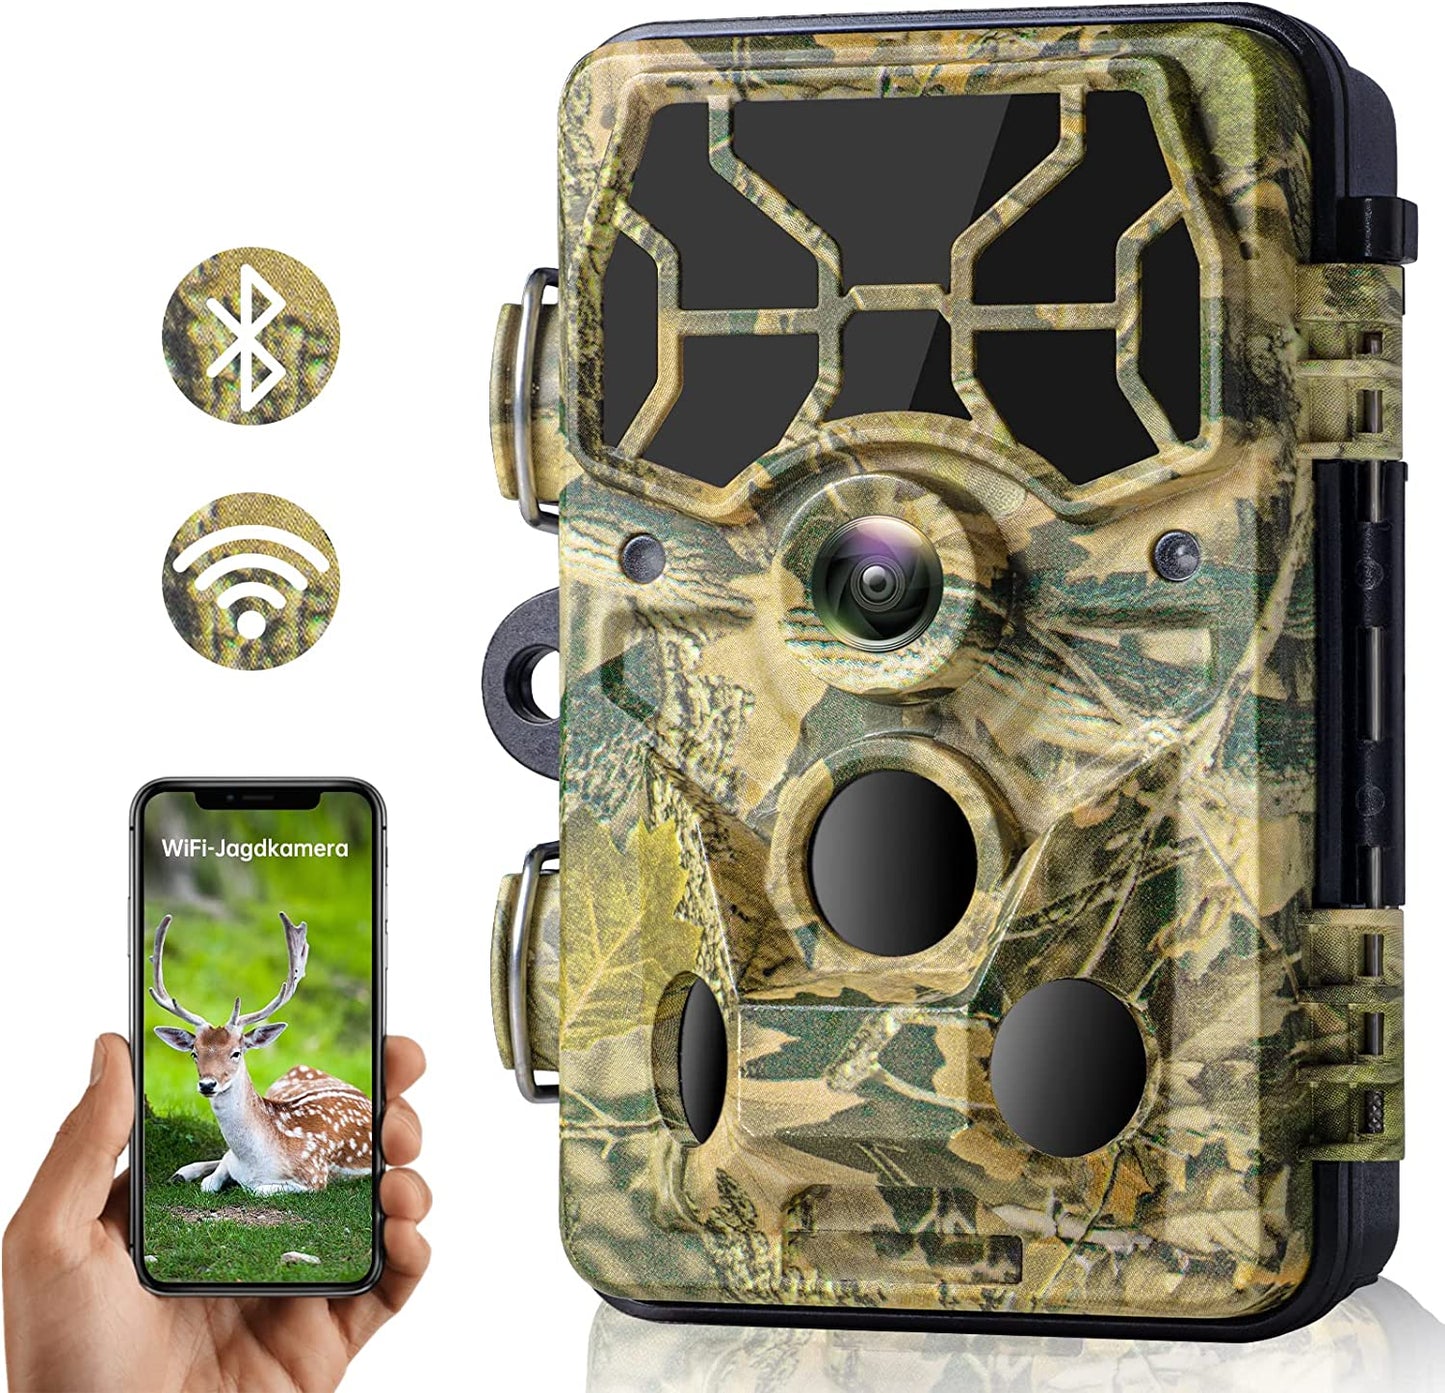 TOGUARD WiFi Bluetooth Trail Camera 20MP 1296P Hunting Game Camera with Infrared Night Vision Waterproof IP66 120° Wide Angle 2.4" LCD Trail Cam for Outdoor Wildlife Monitoring